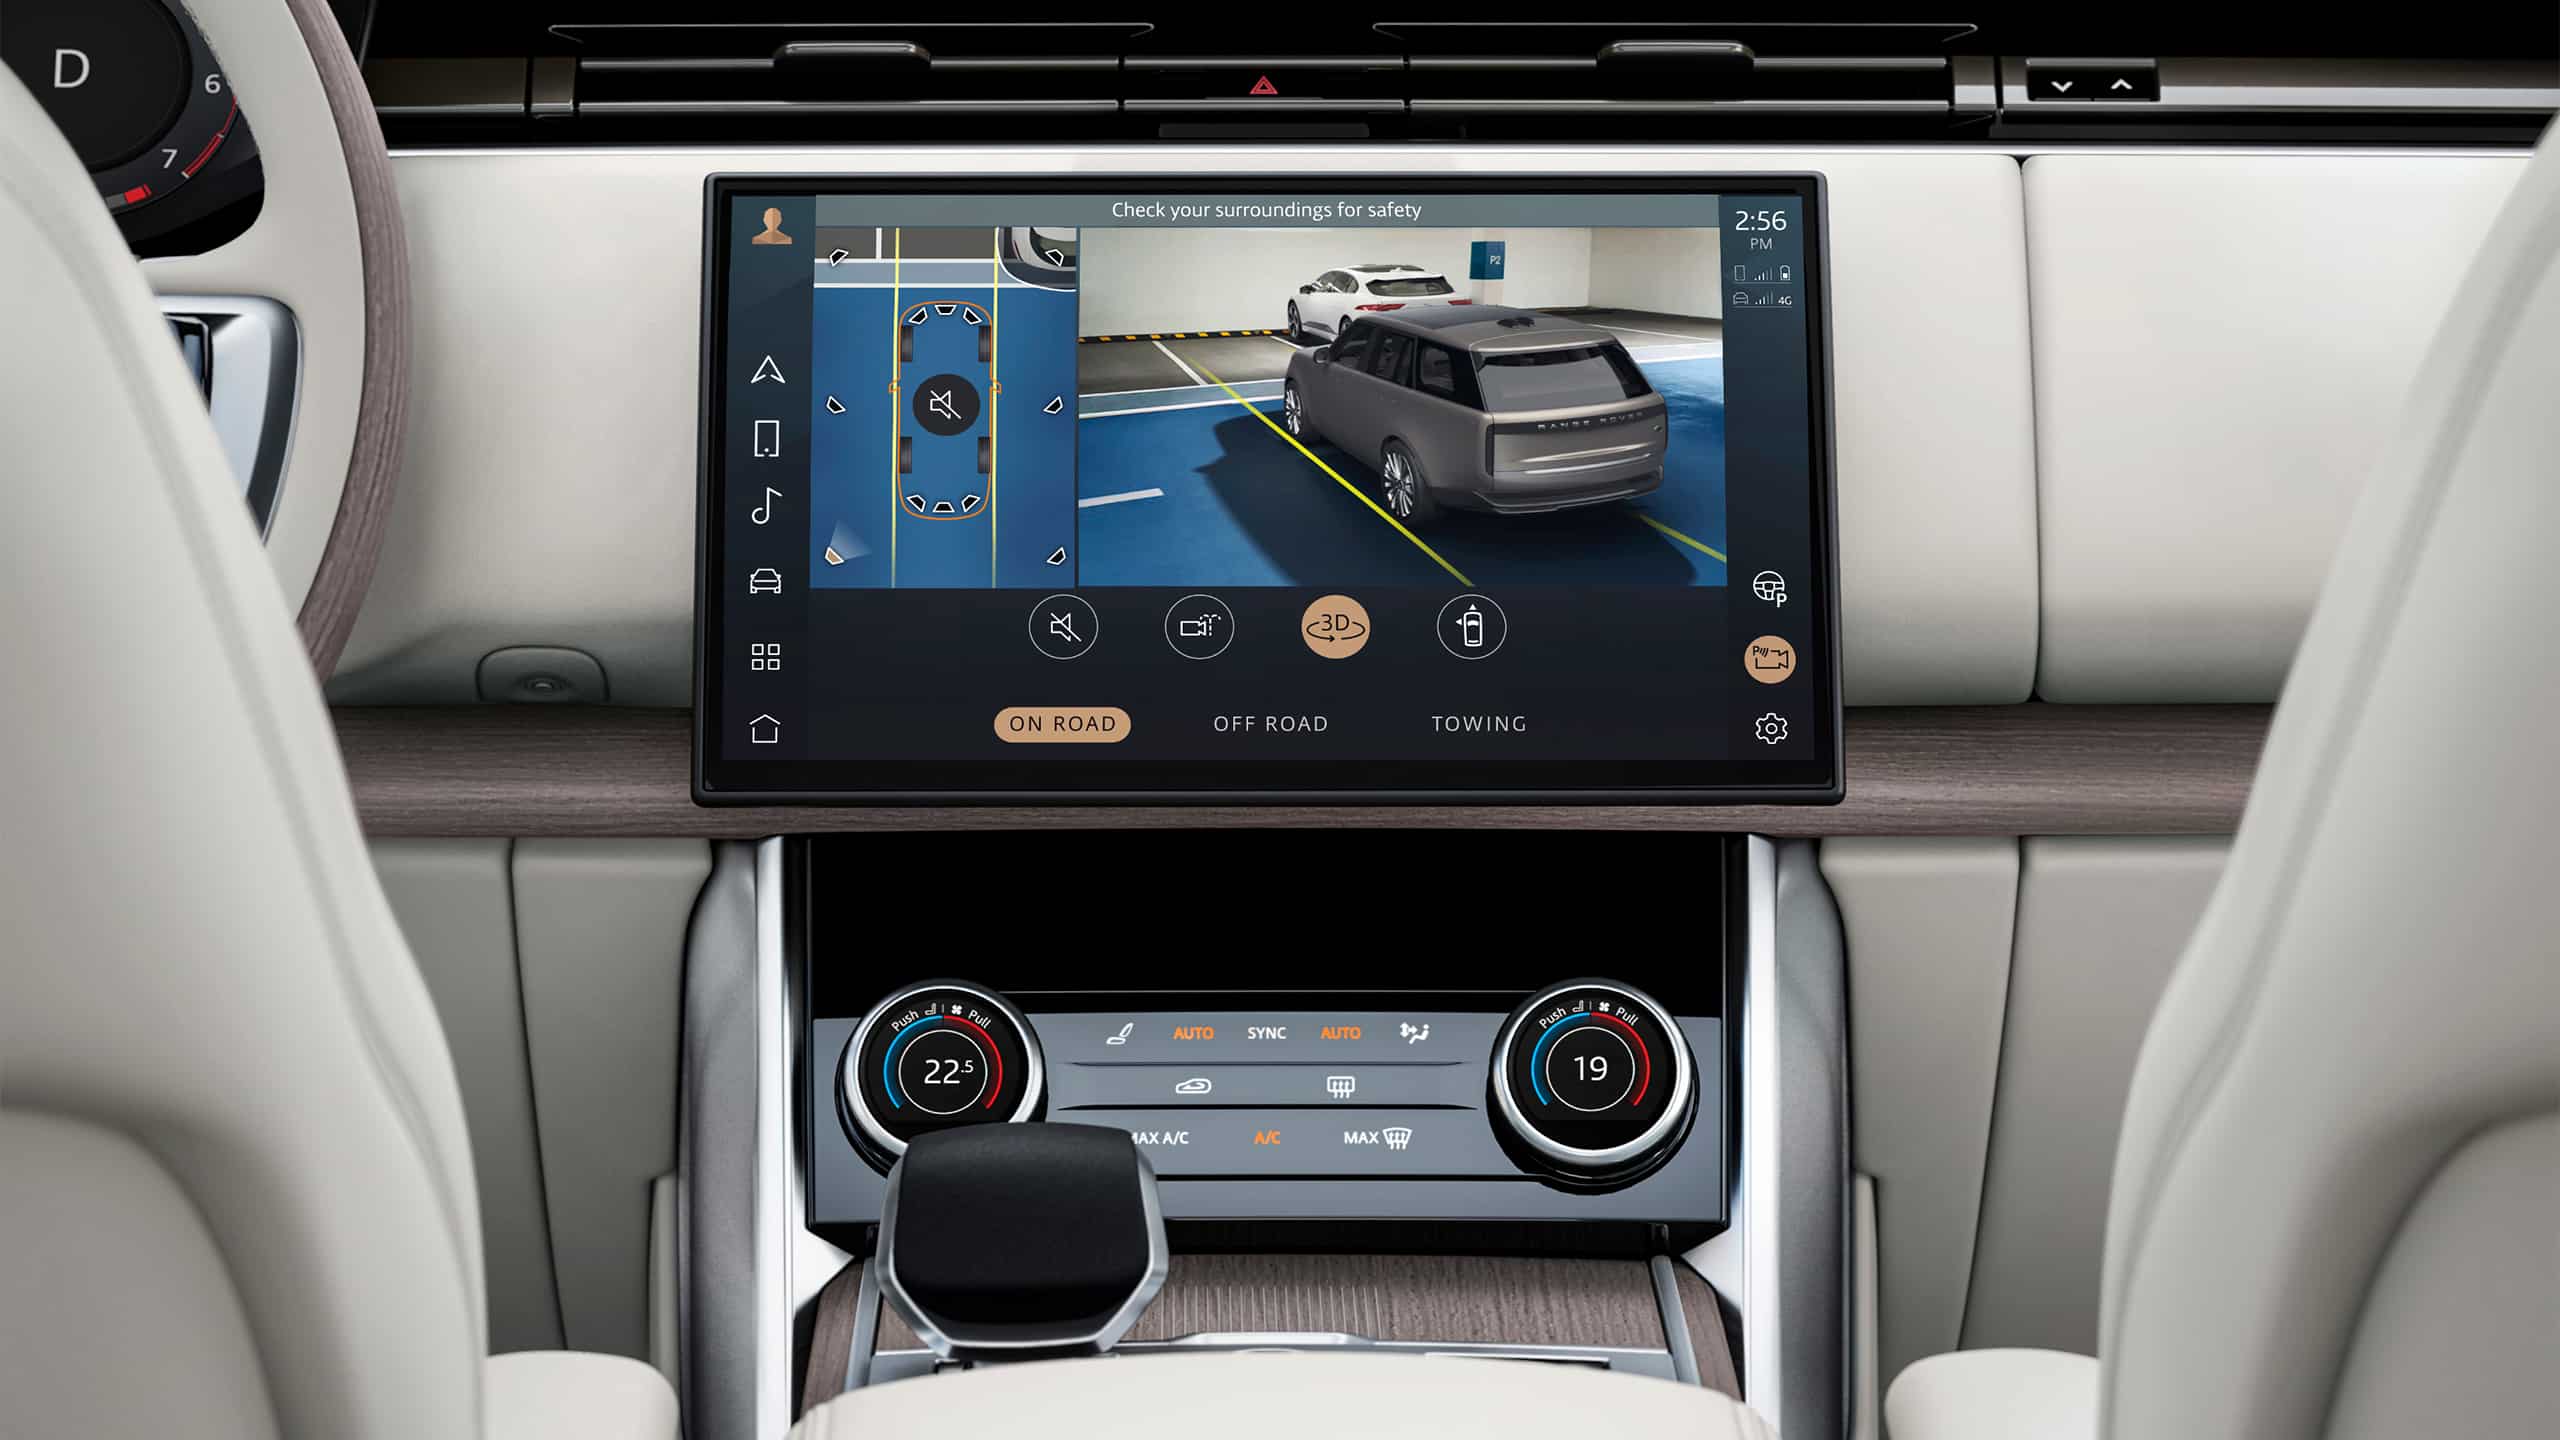 Range Rover All-round Body Imaging System